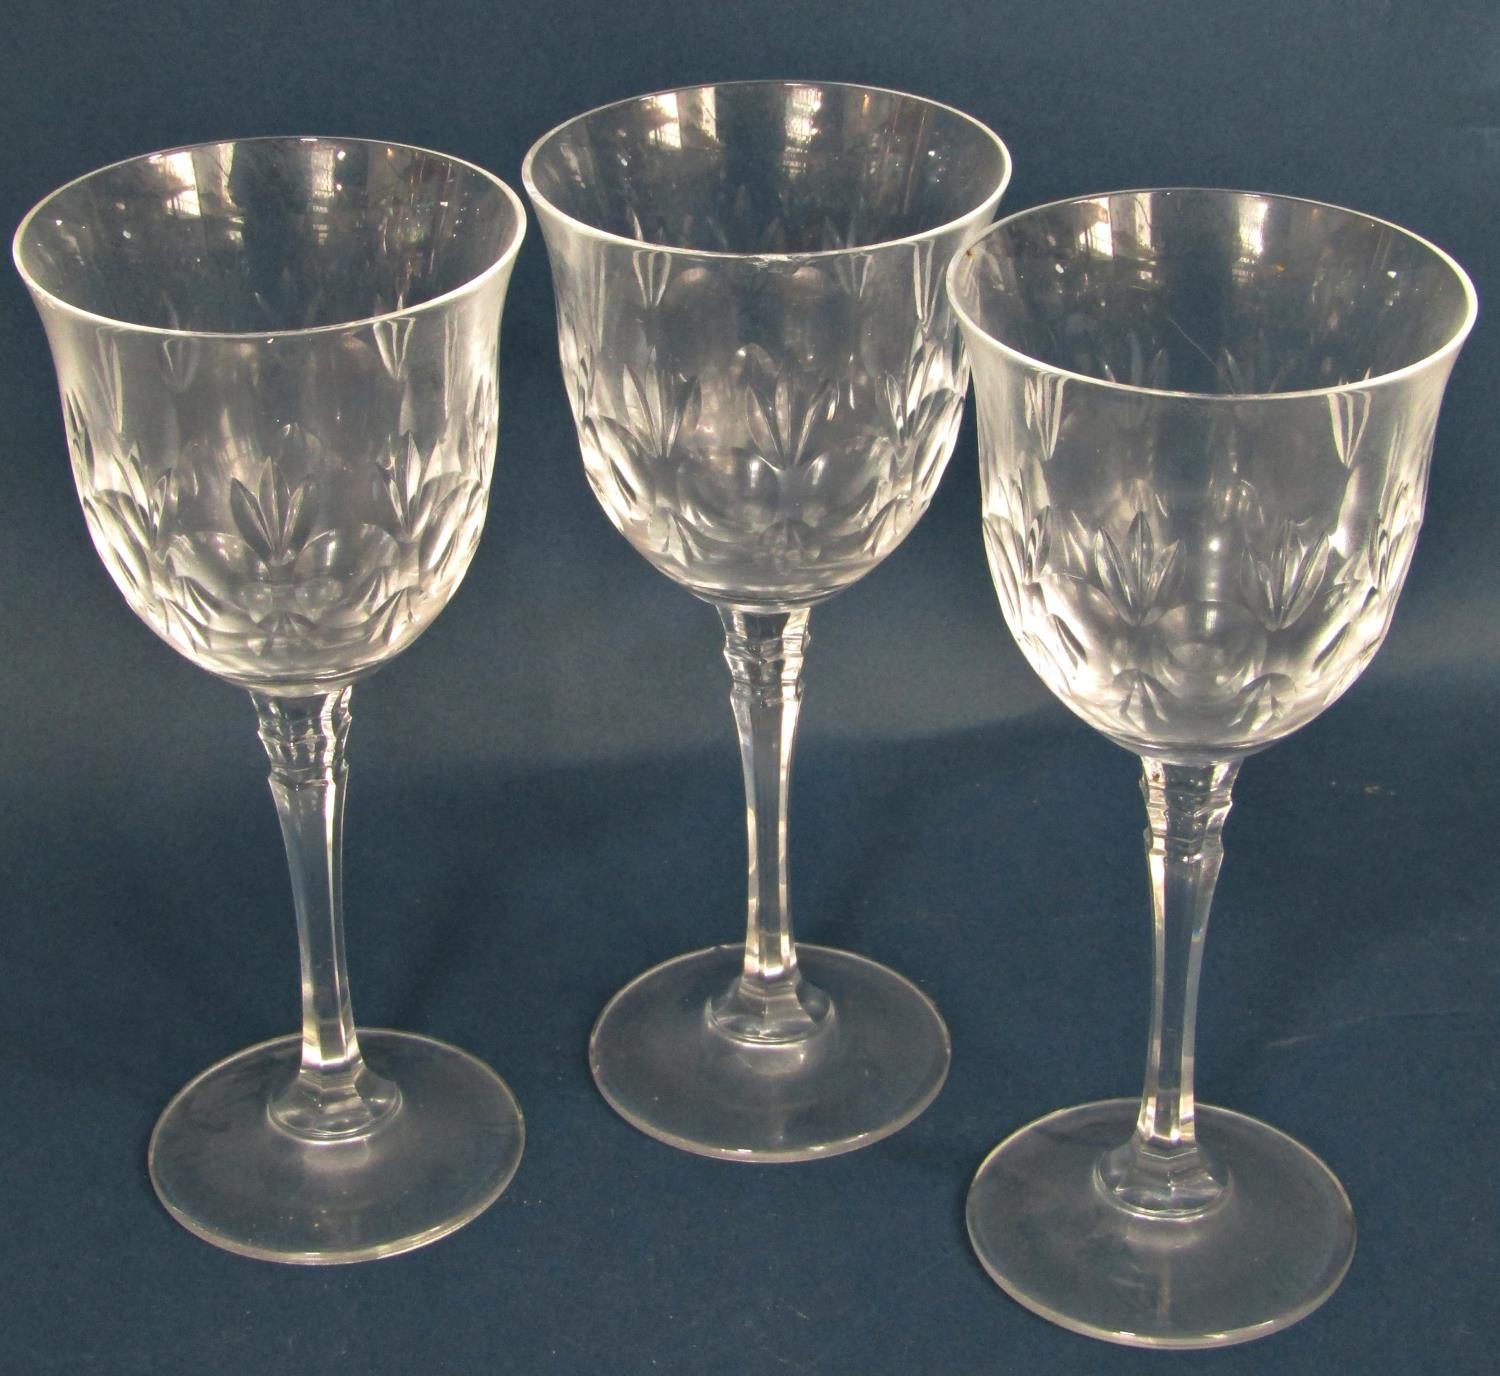 Six amber glass hock wine glasses with etched vine leaf decoration, five cut glass wine glass, and a - Image 2 of 3